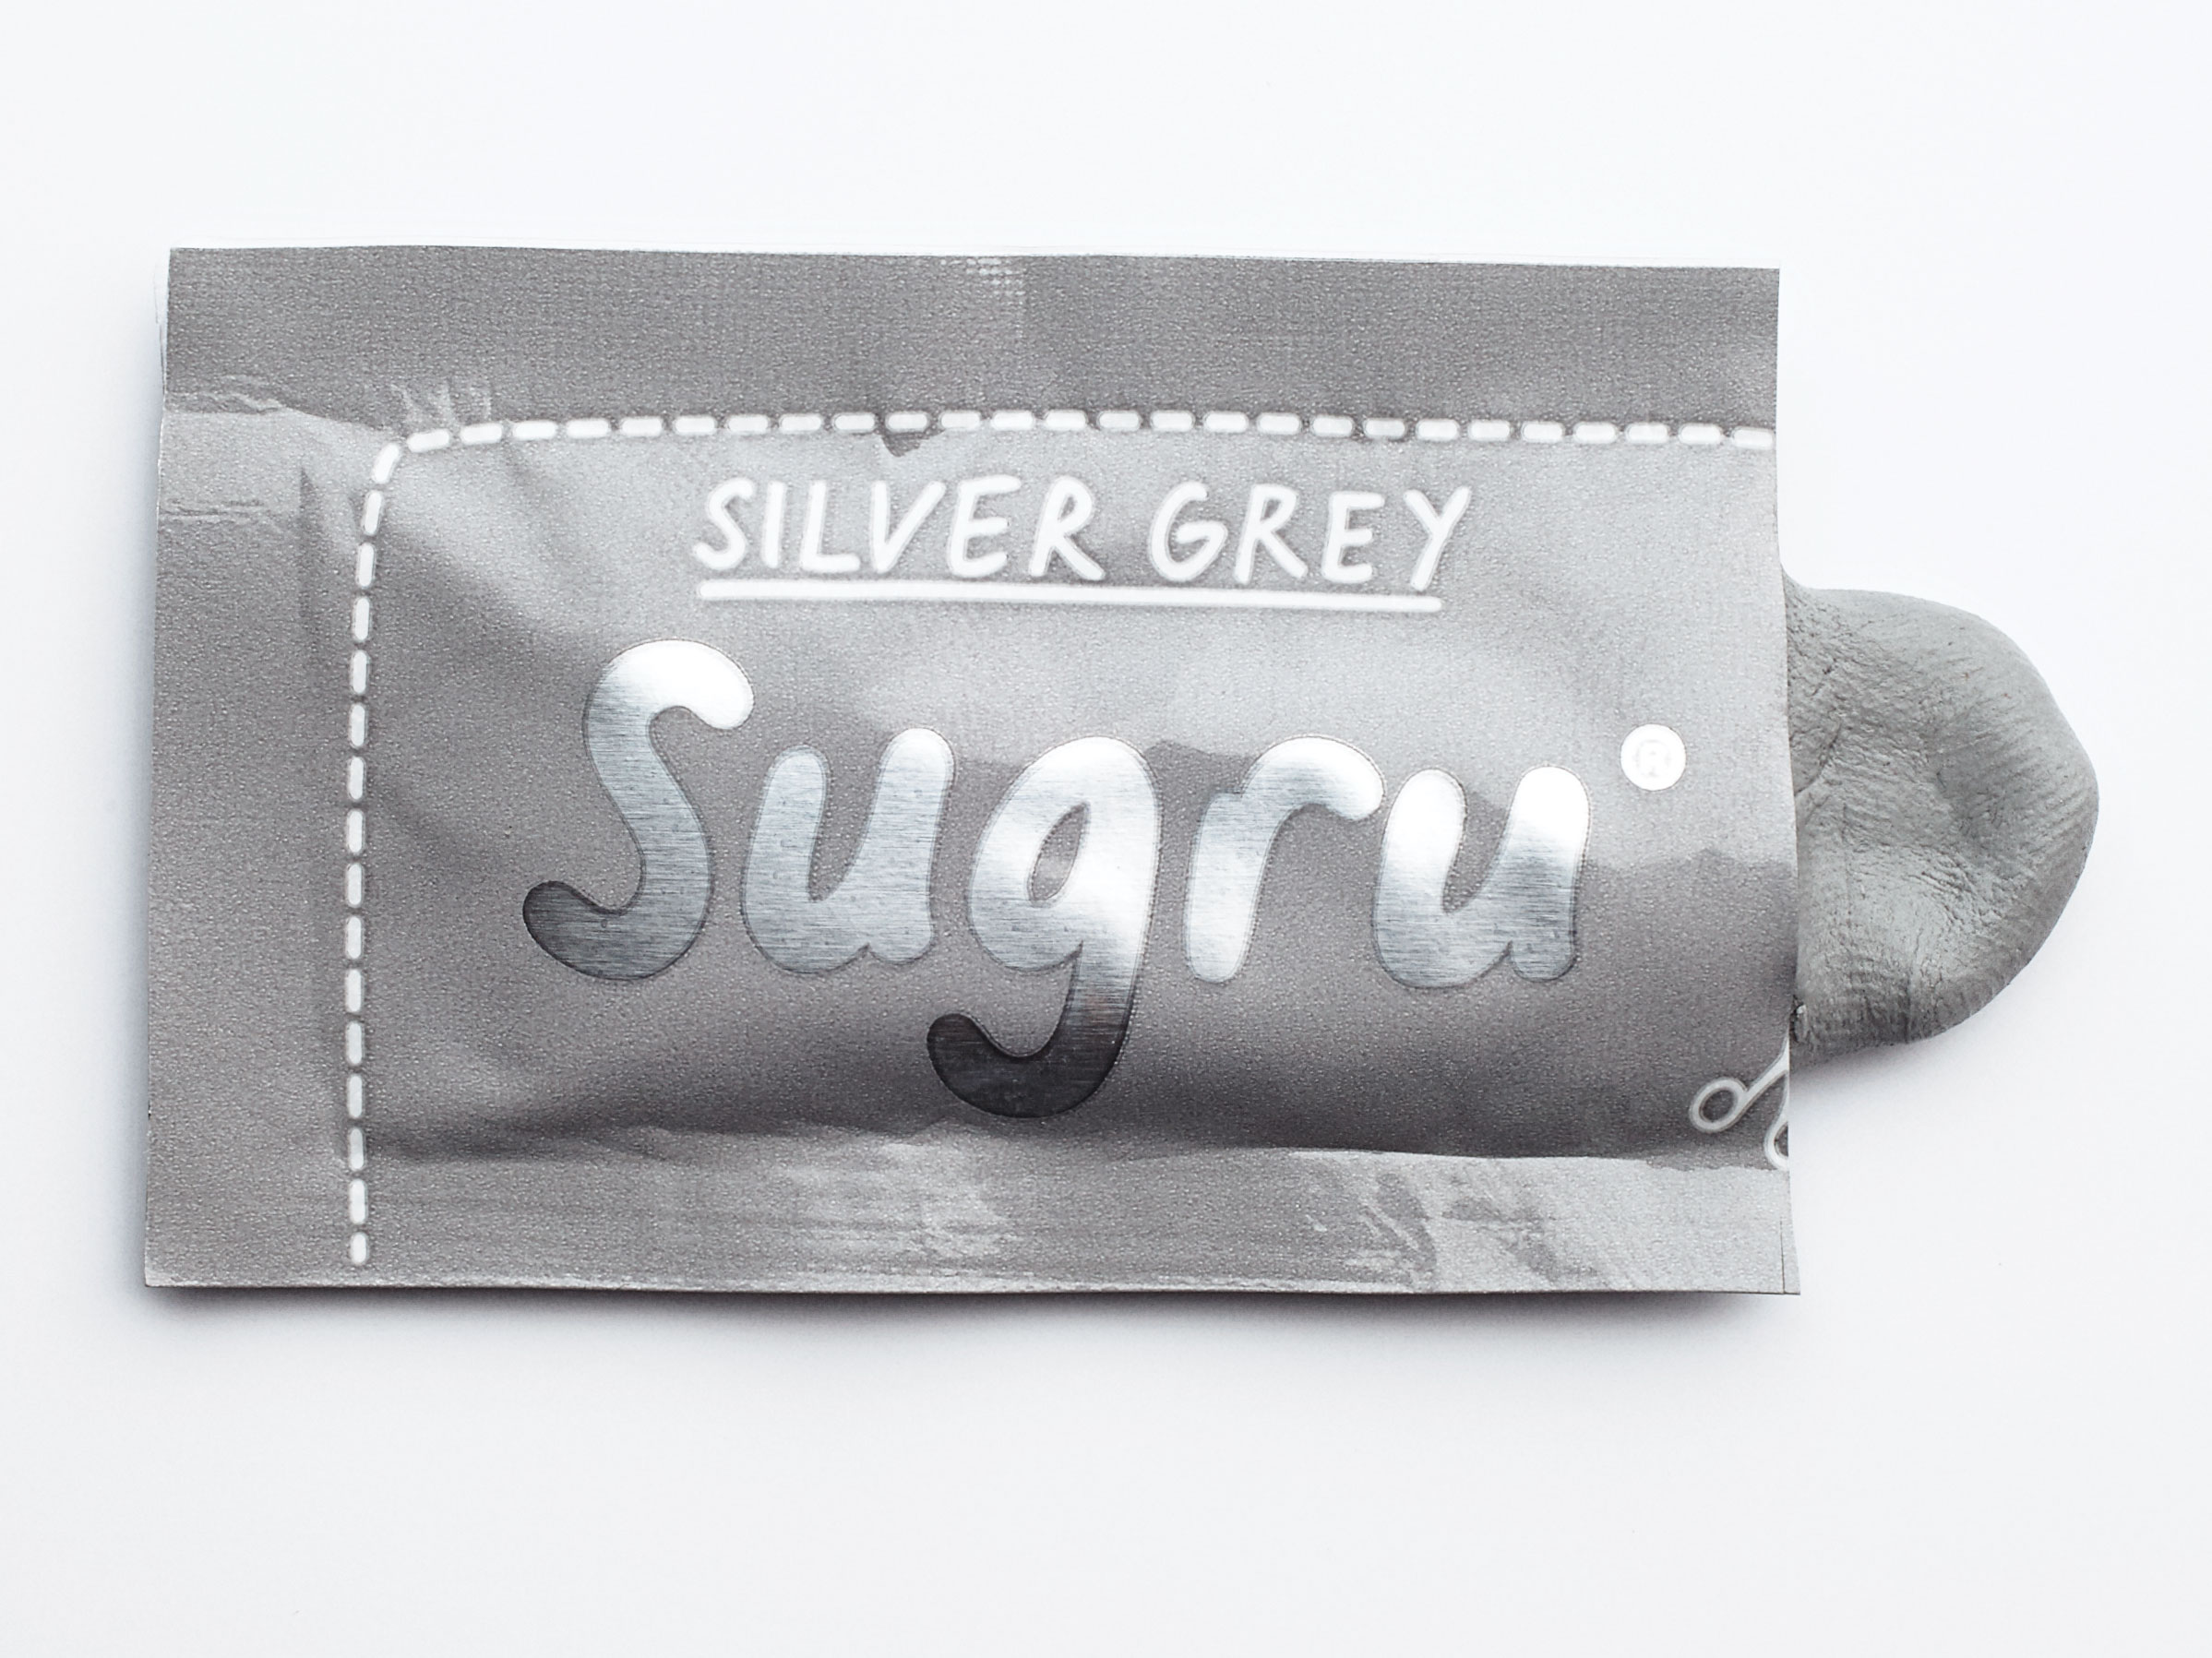 Sugru Is The Play-Doh Of Glue